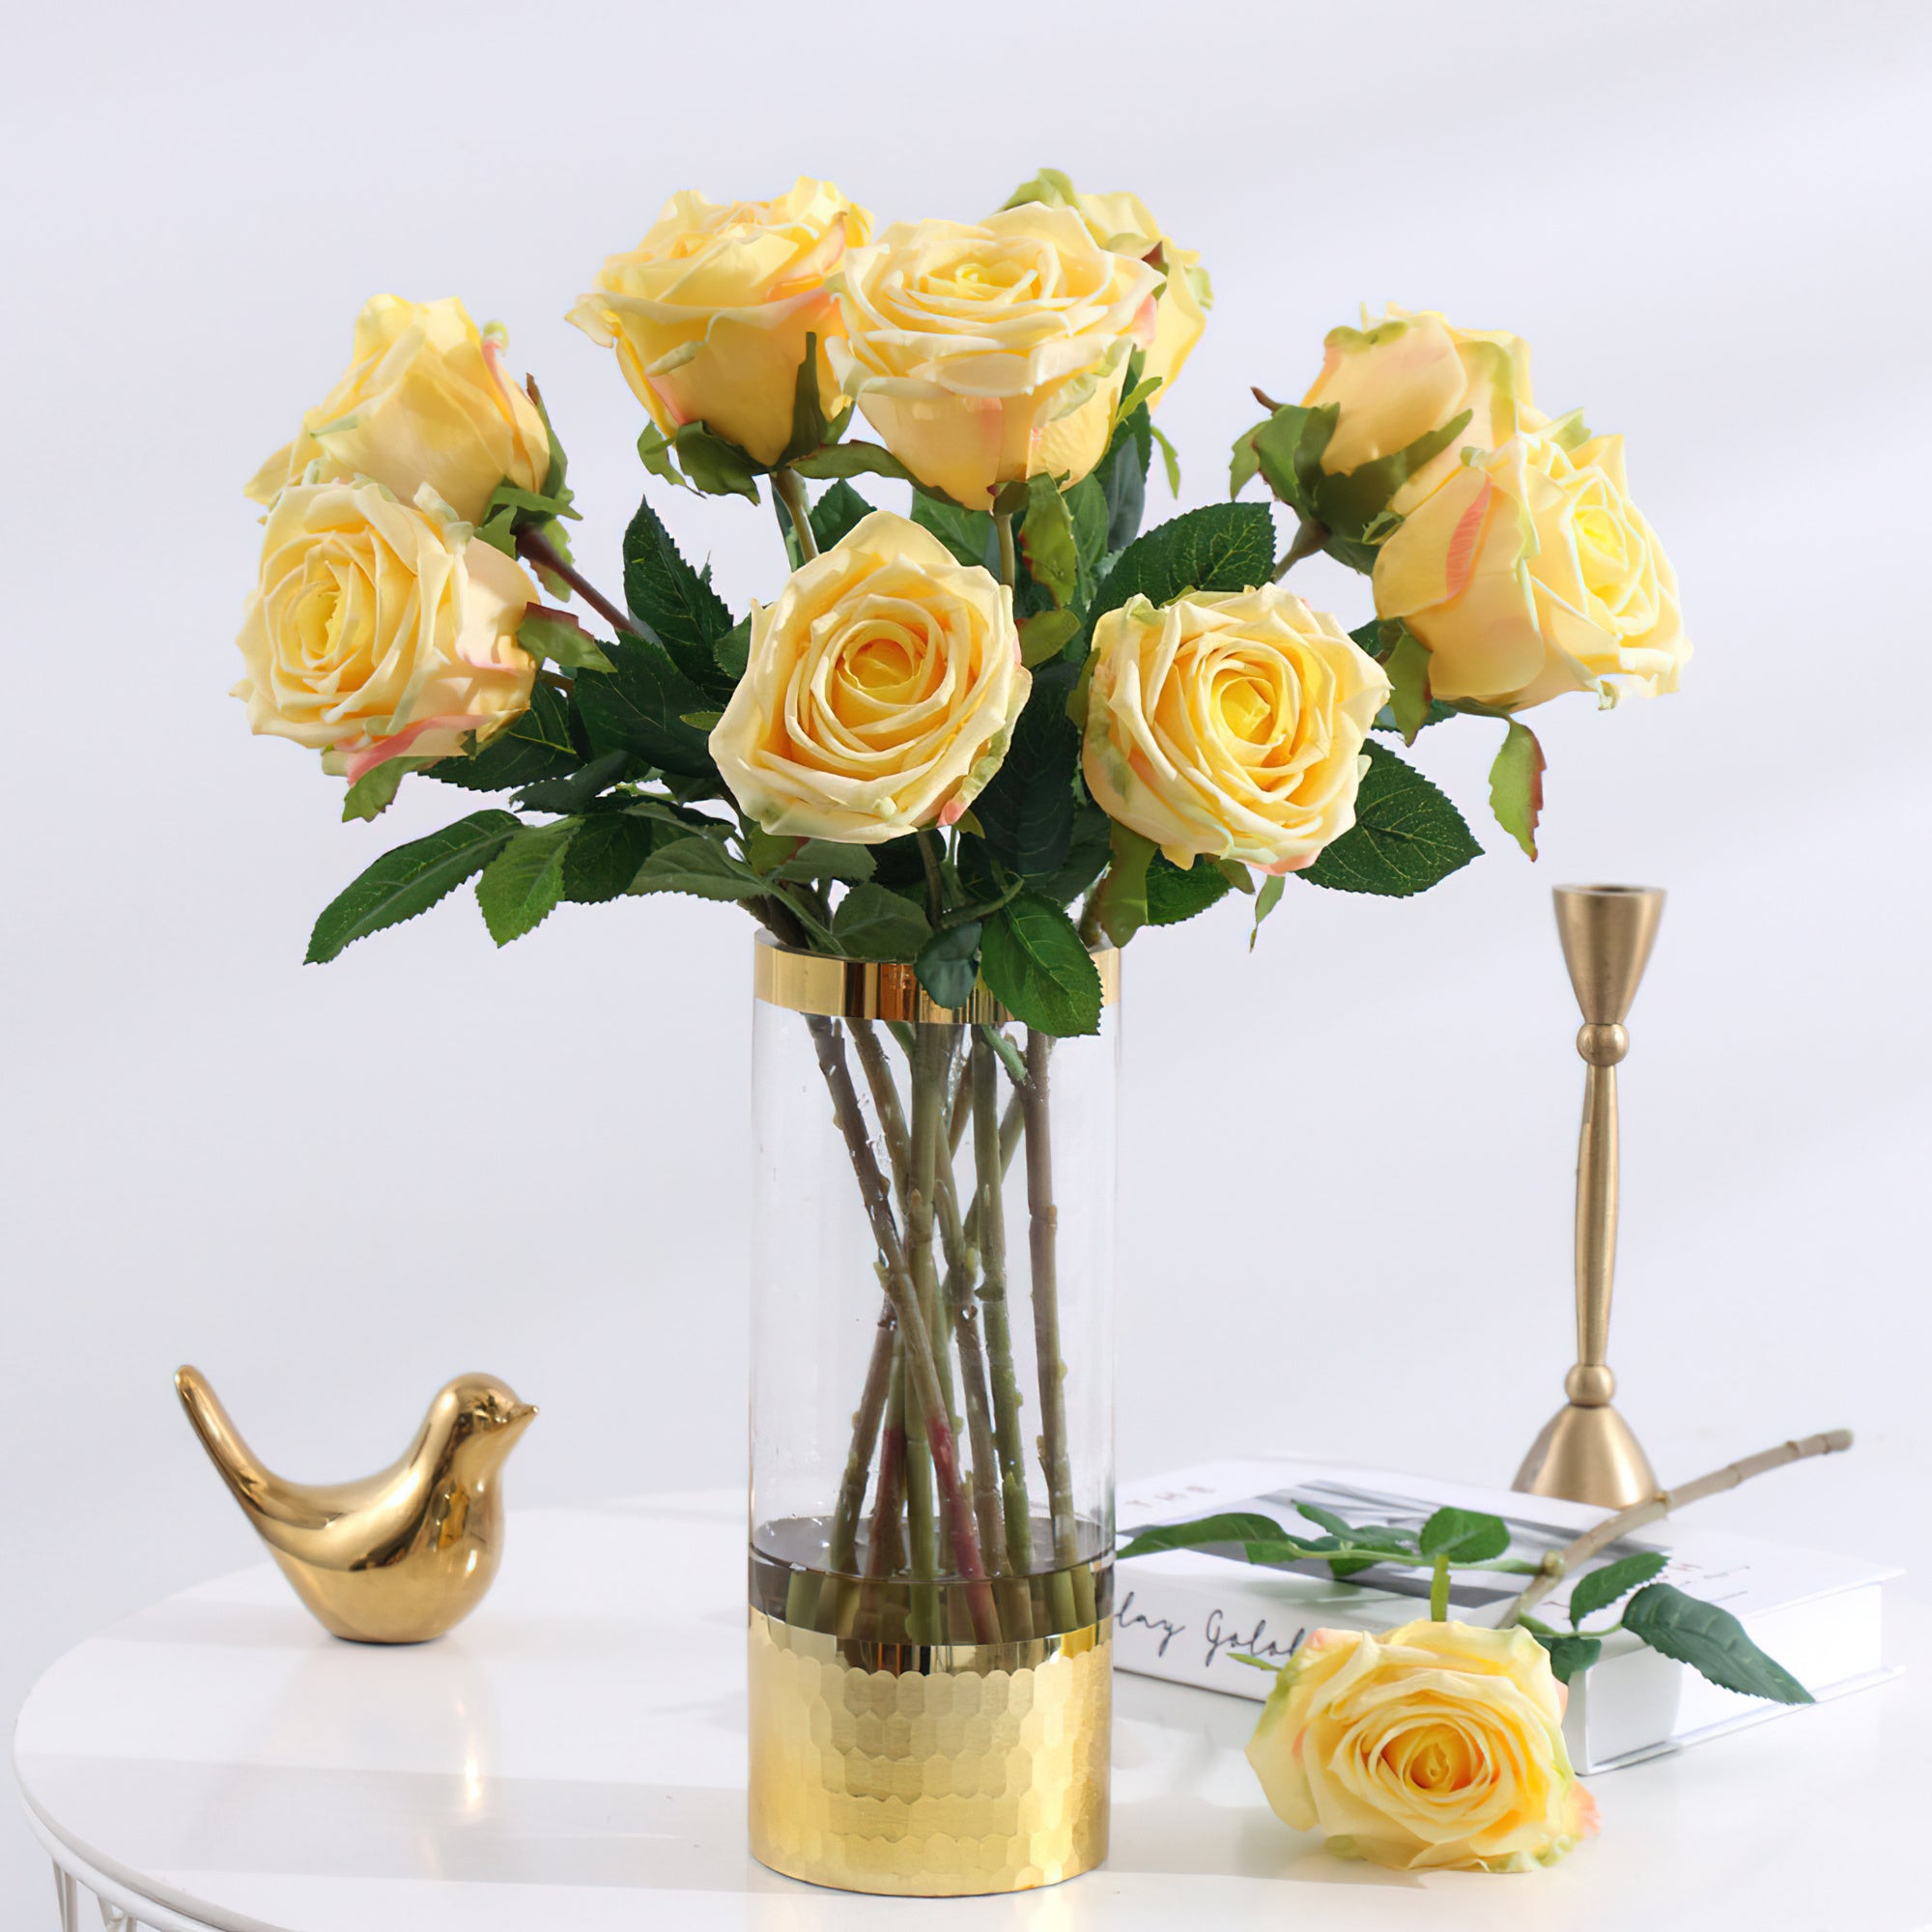 European Style Rose Faux Bouquet - Premium Moisture-Rich Feel Artificial Roses for Home, Living Room & Dining Decor - Elegant Wedding Embellishments and Deluxe Props